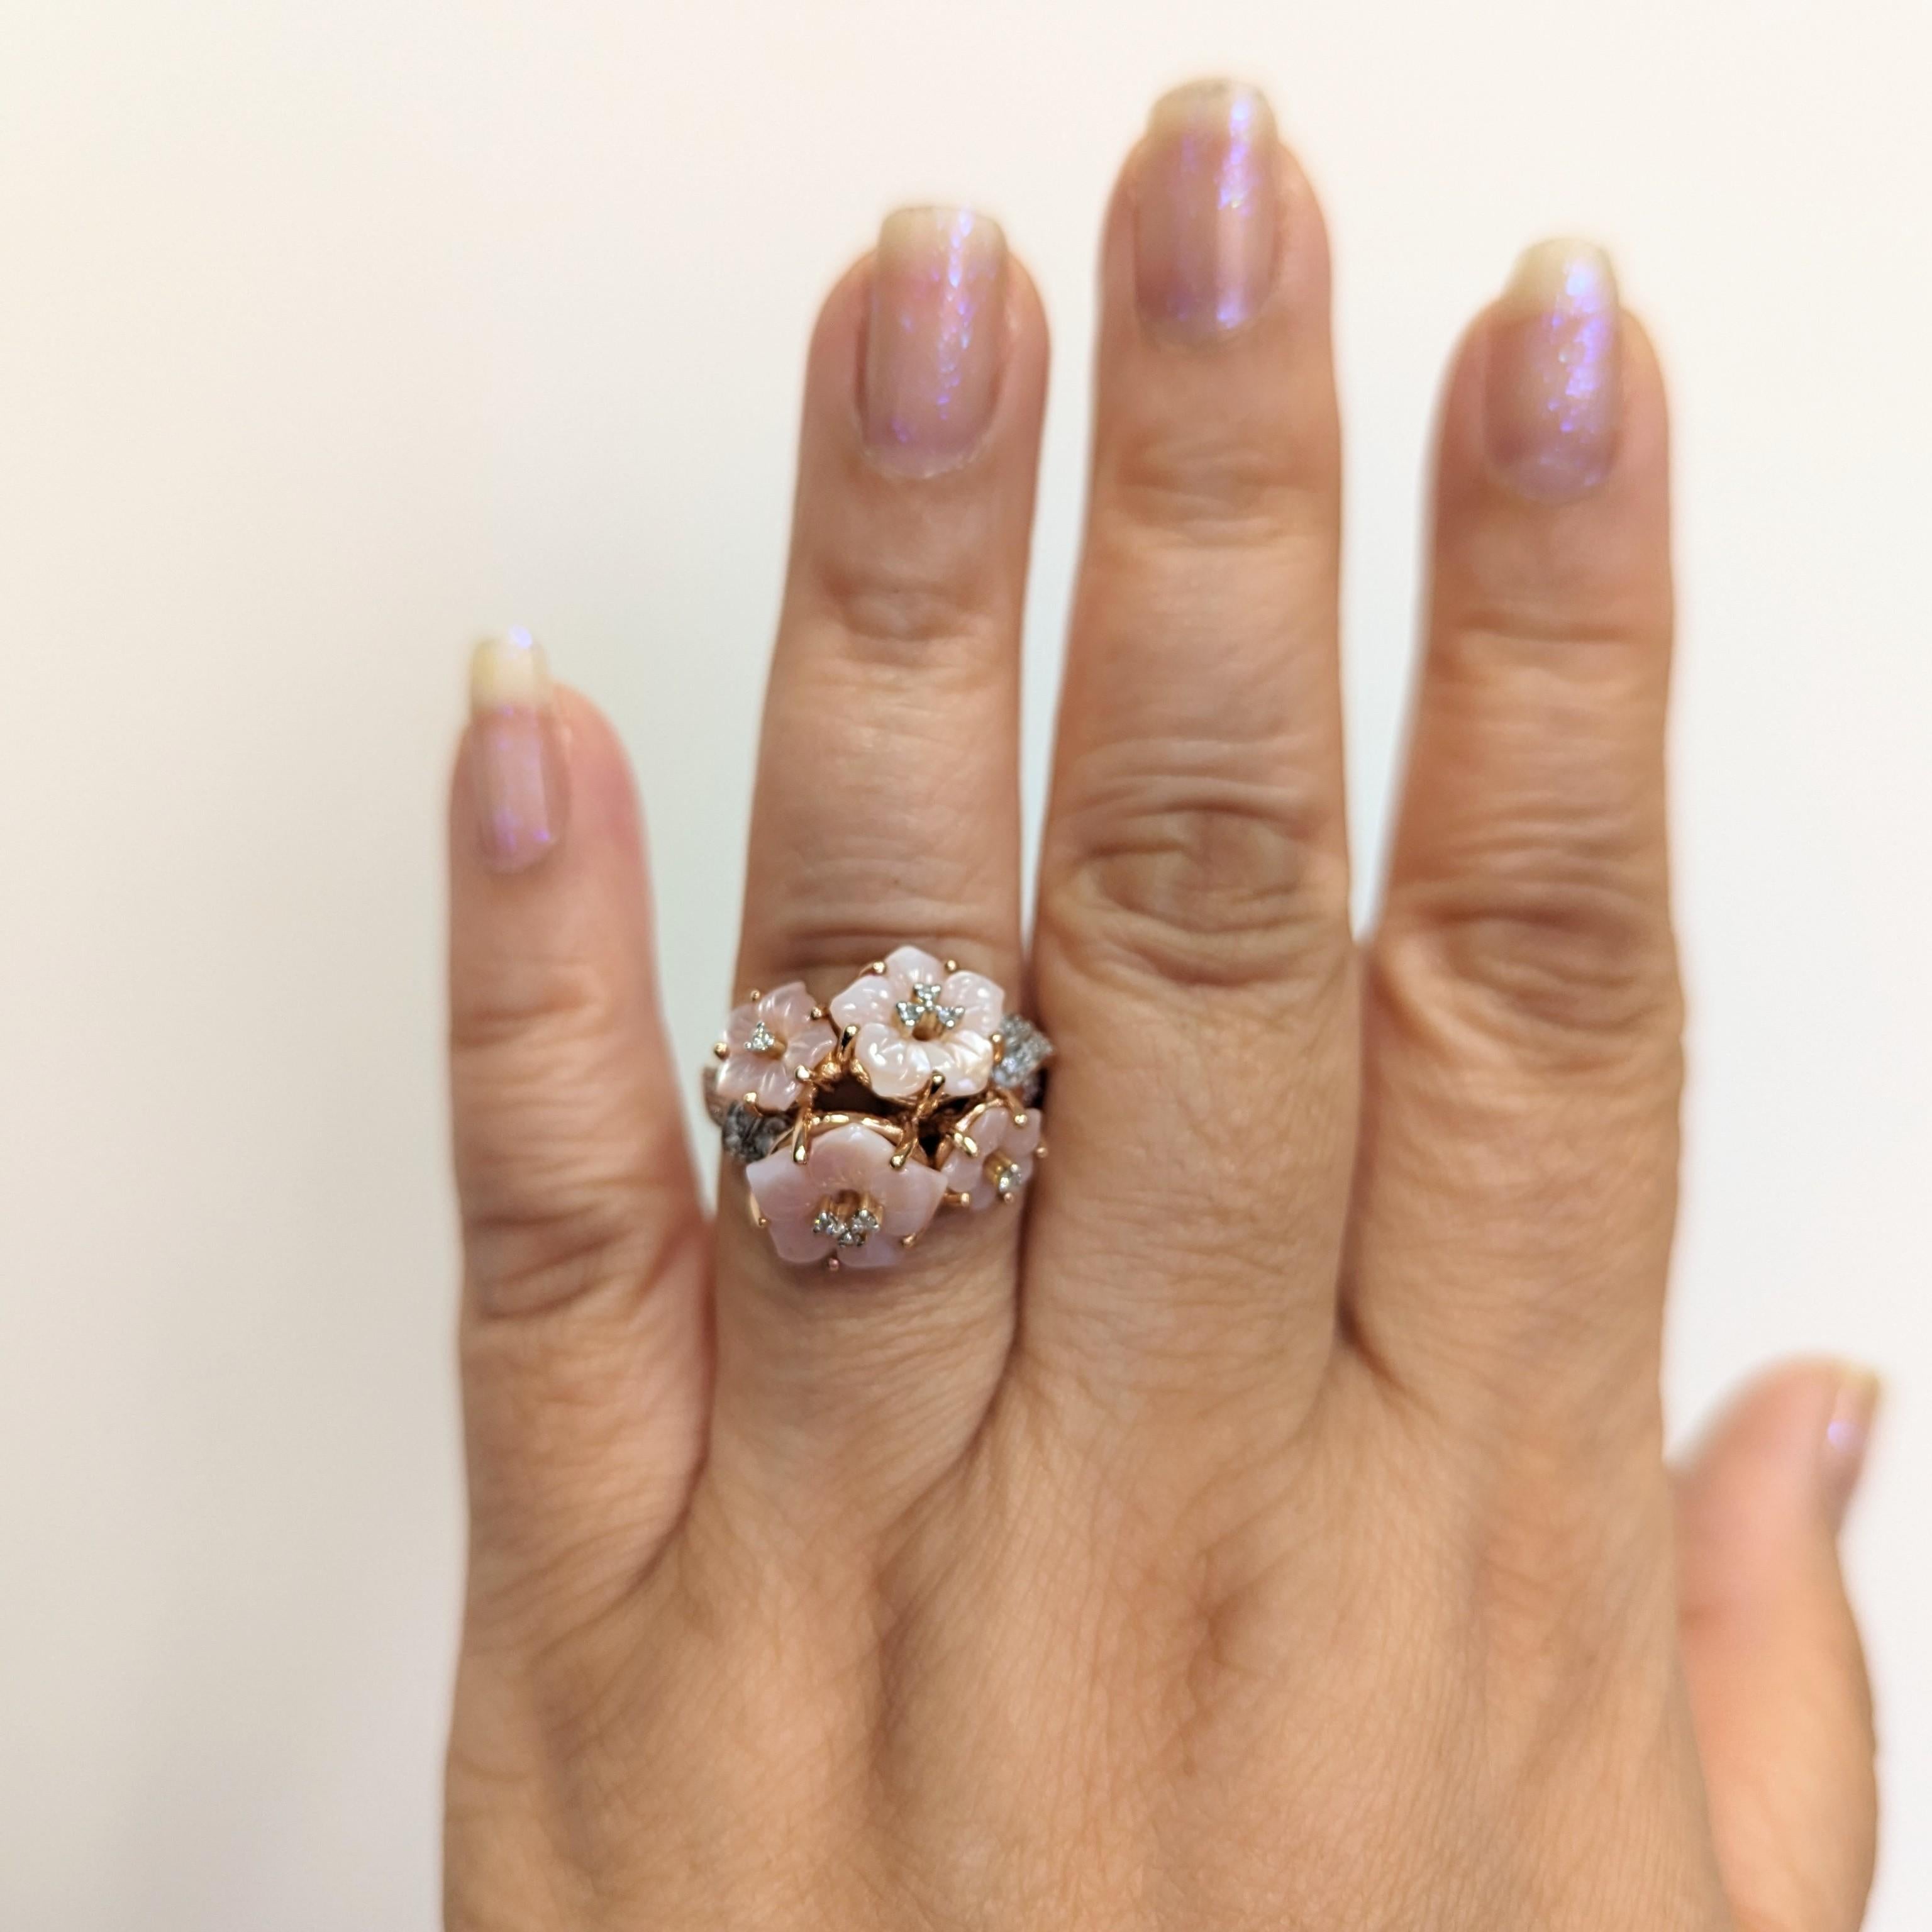 Beautiful carved rose quartz and 0.10 ct. white diamond rounds.  Handmade in 14k yellow gold.  Ring size 10.25.